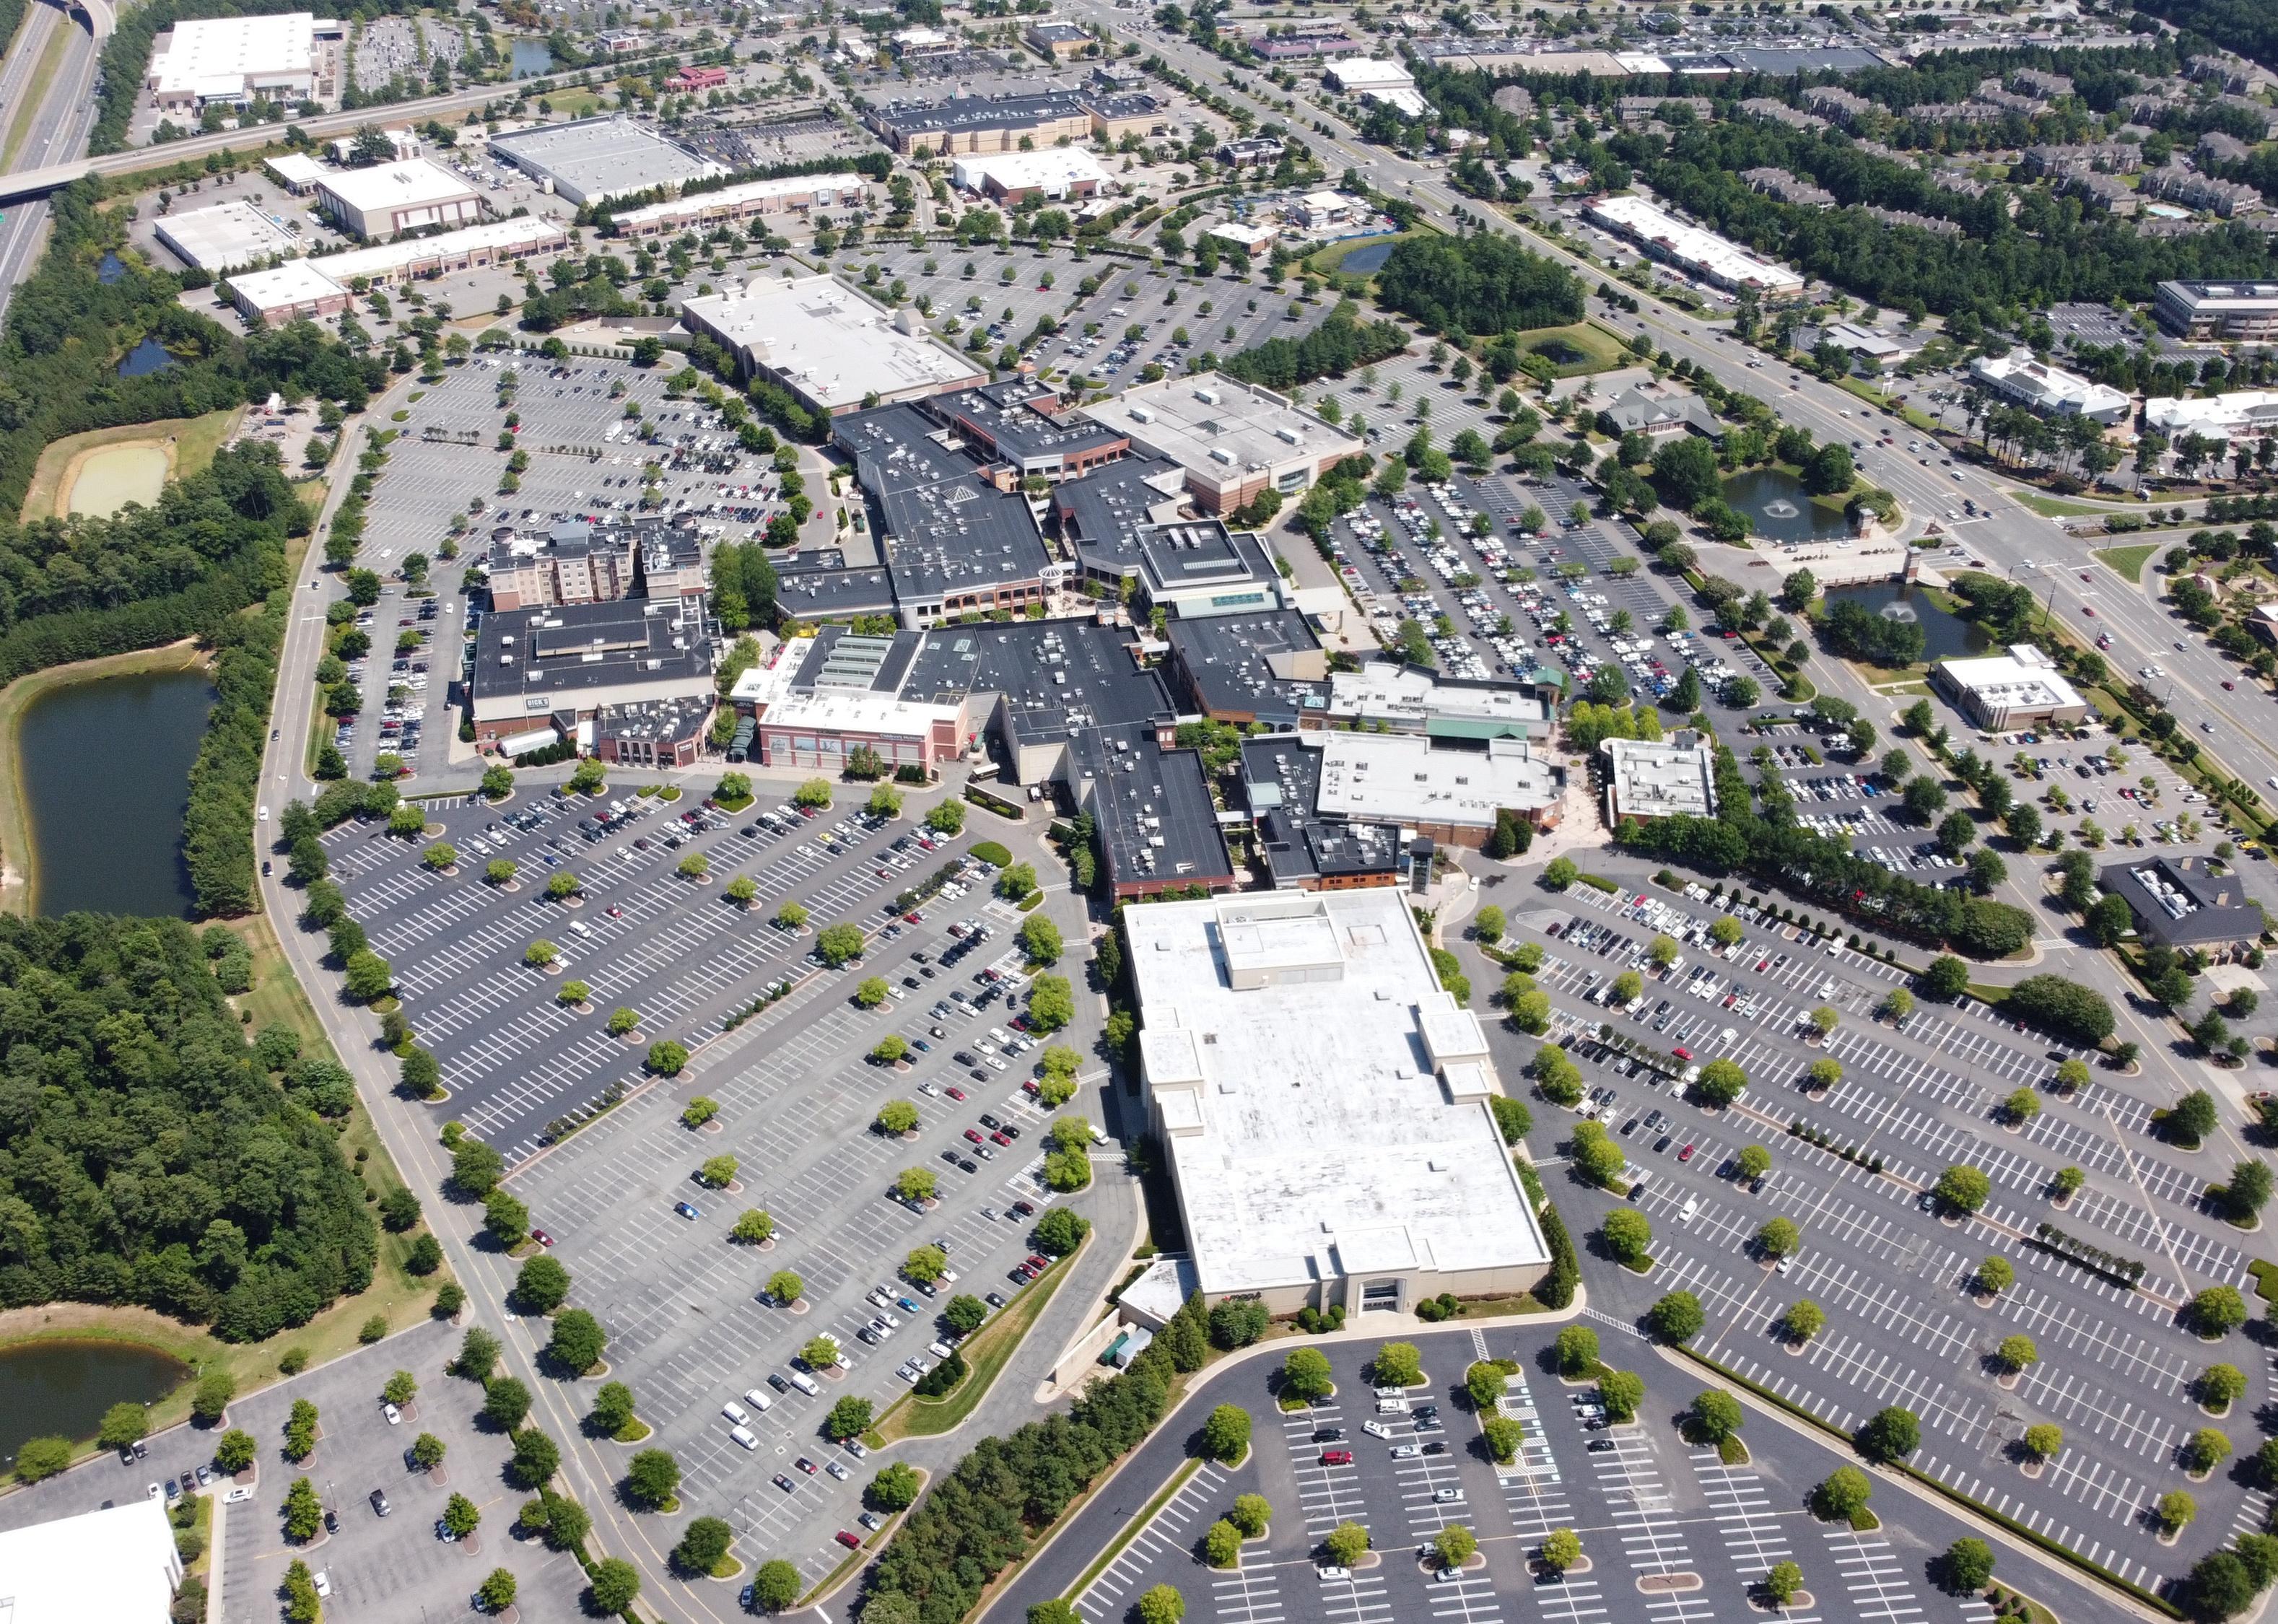 An aerial view of buildings surrounded by parking lots.